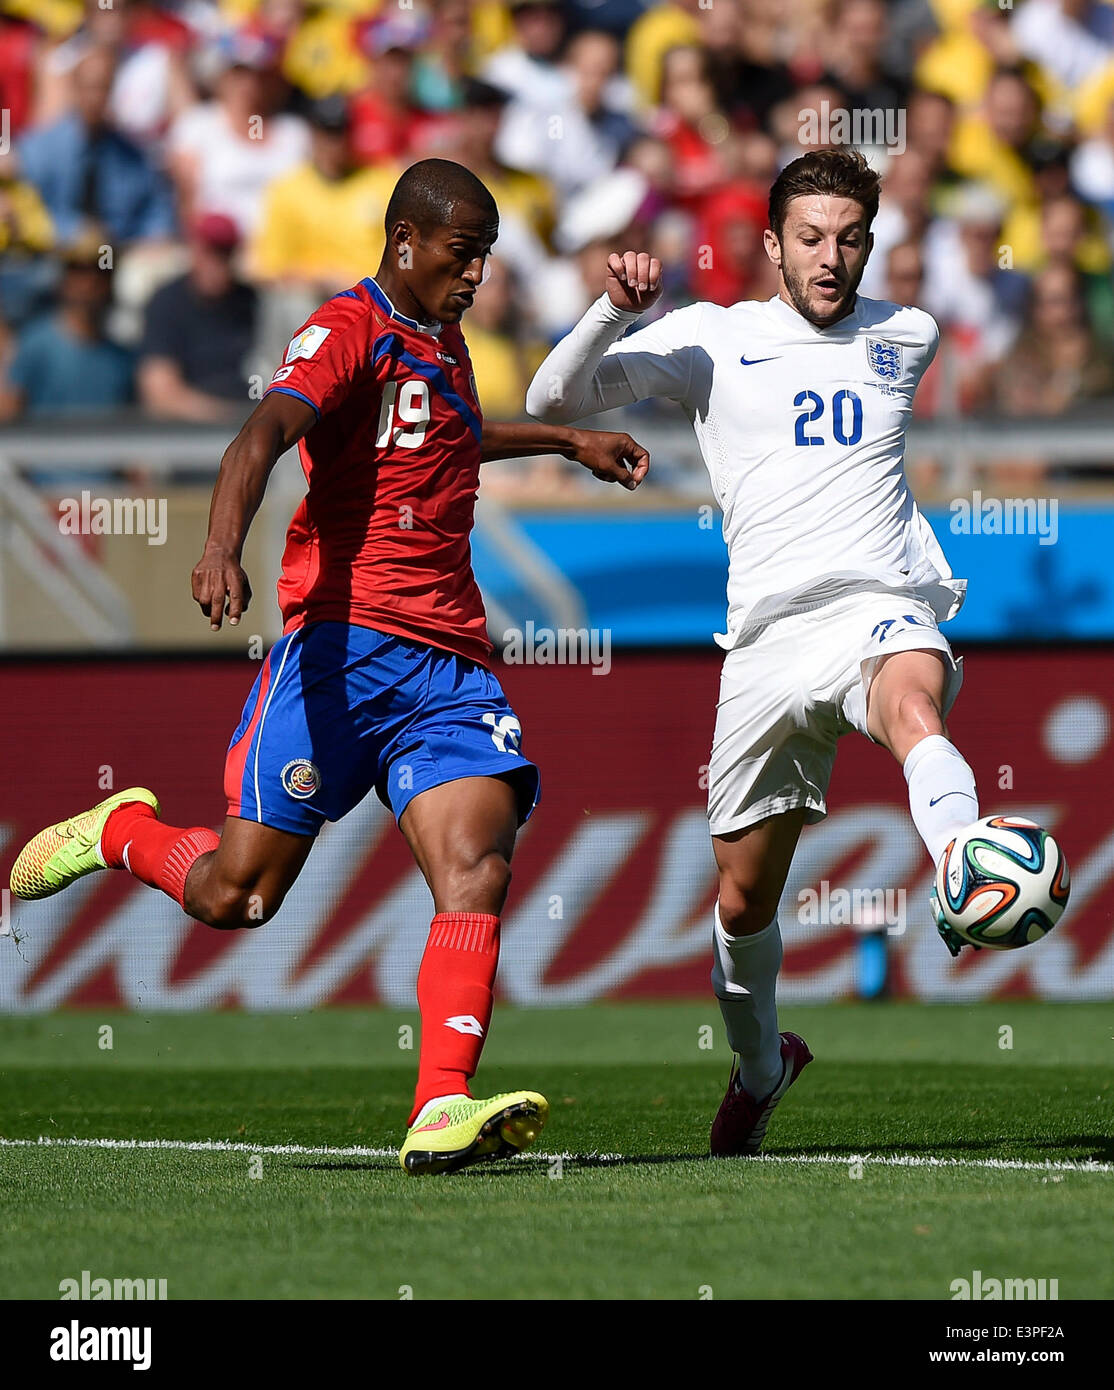 Belo Horizonte, Brazil. 24th June, 2014. England's Adam Lallana (R) vies with Costa Rica's Roy Miller during a Group D match between Costa Rica and England of 2014 FIFA World Cup at the Estadio Mineirao Stadium in Belo Horizonte, Brazil, on June 24, 2014. England drew 0-0 with Costa Rica on Tuesday. © Qi Heng/Xinhua/Alamy Live News Stock Photo